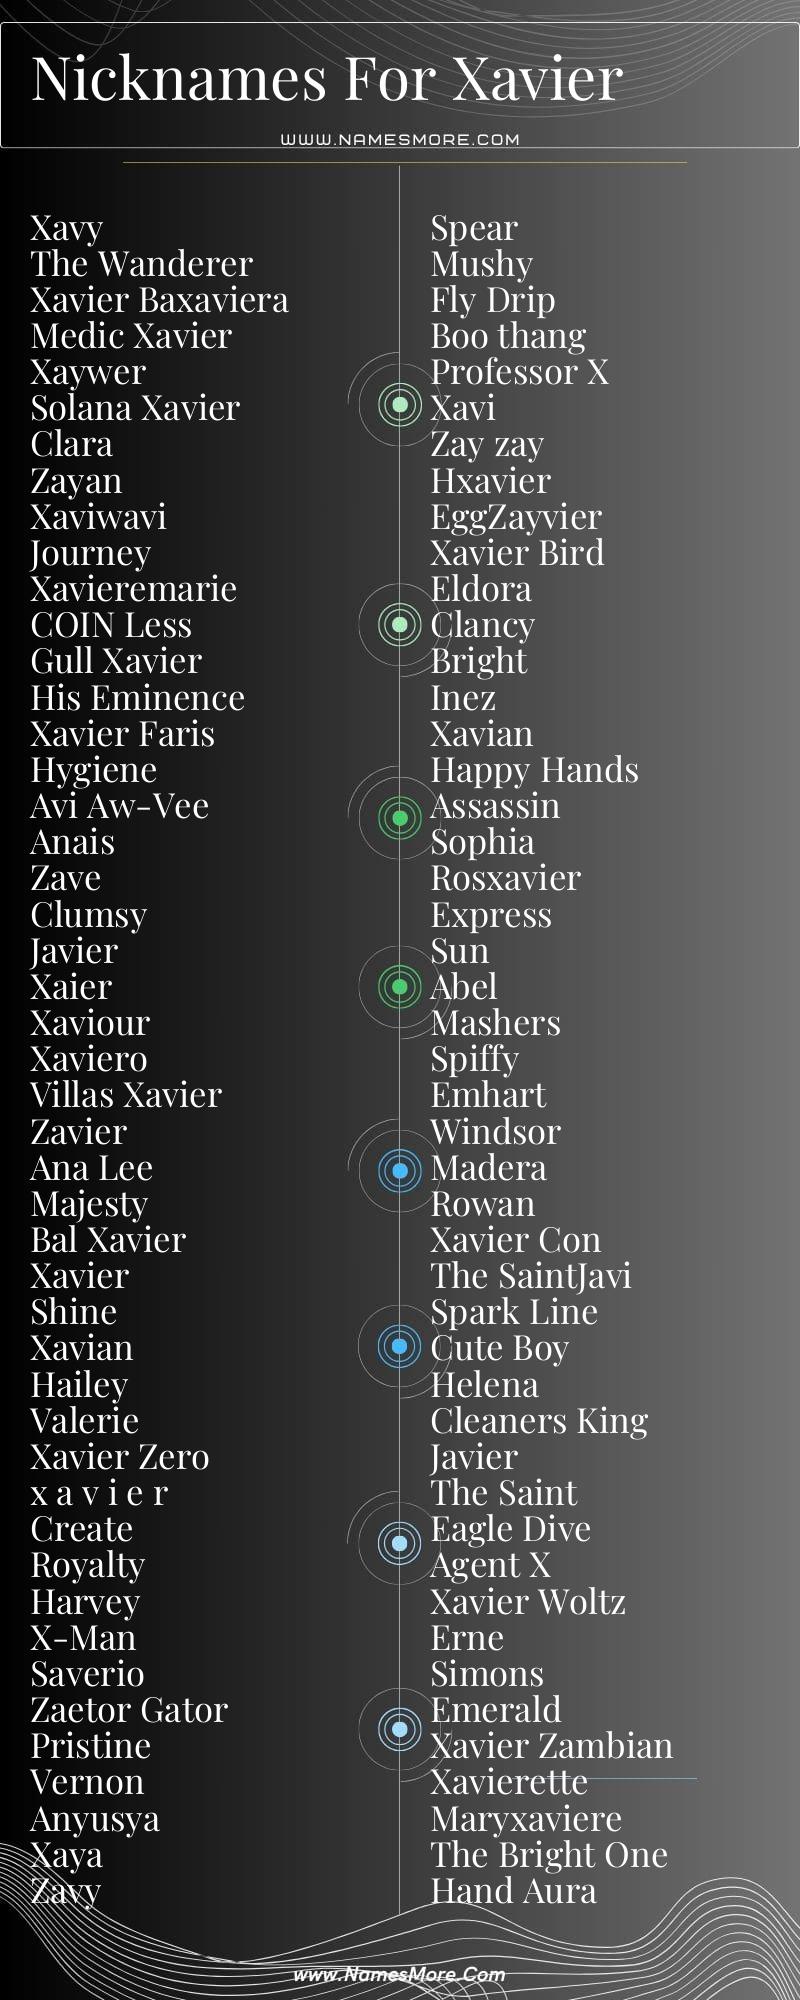 1100+ Nicknames For Xavier (Funny & Cool) List Infographic